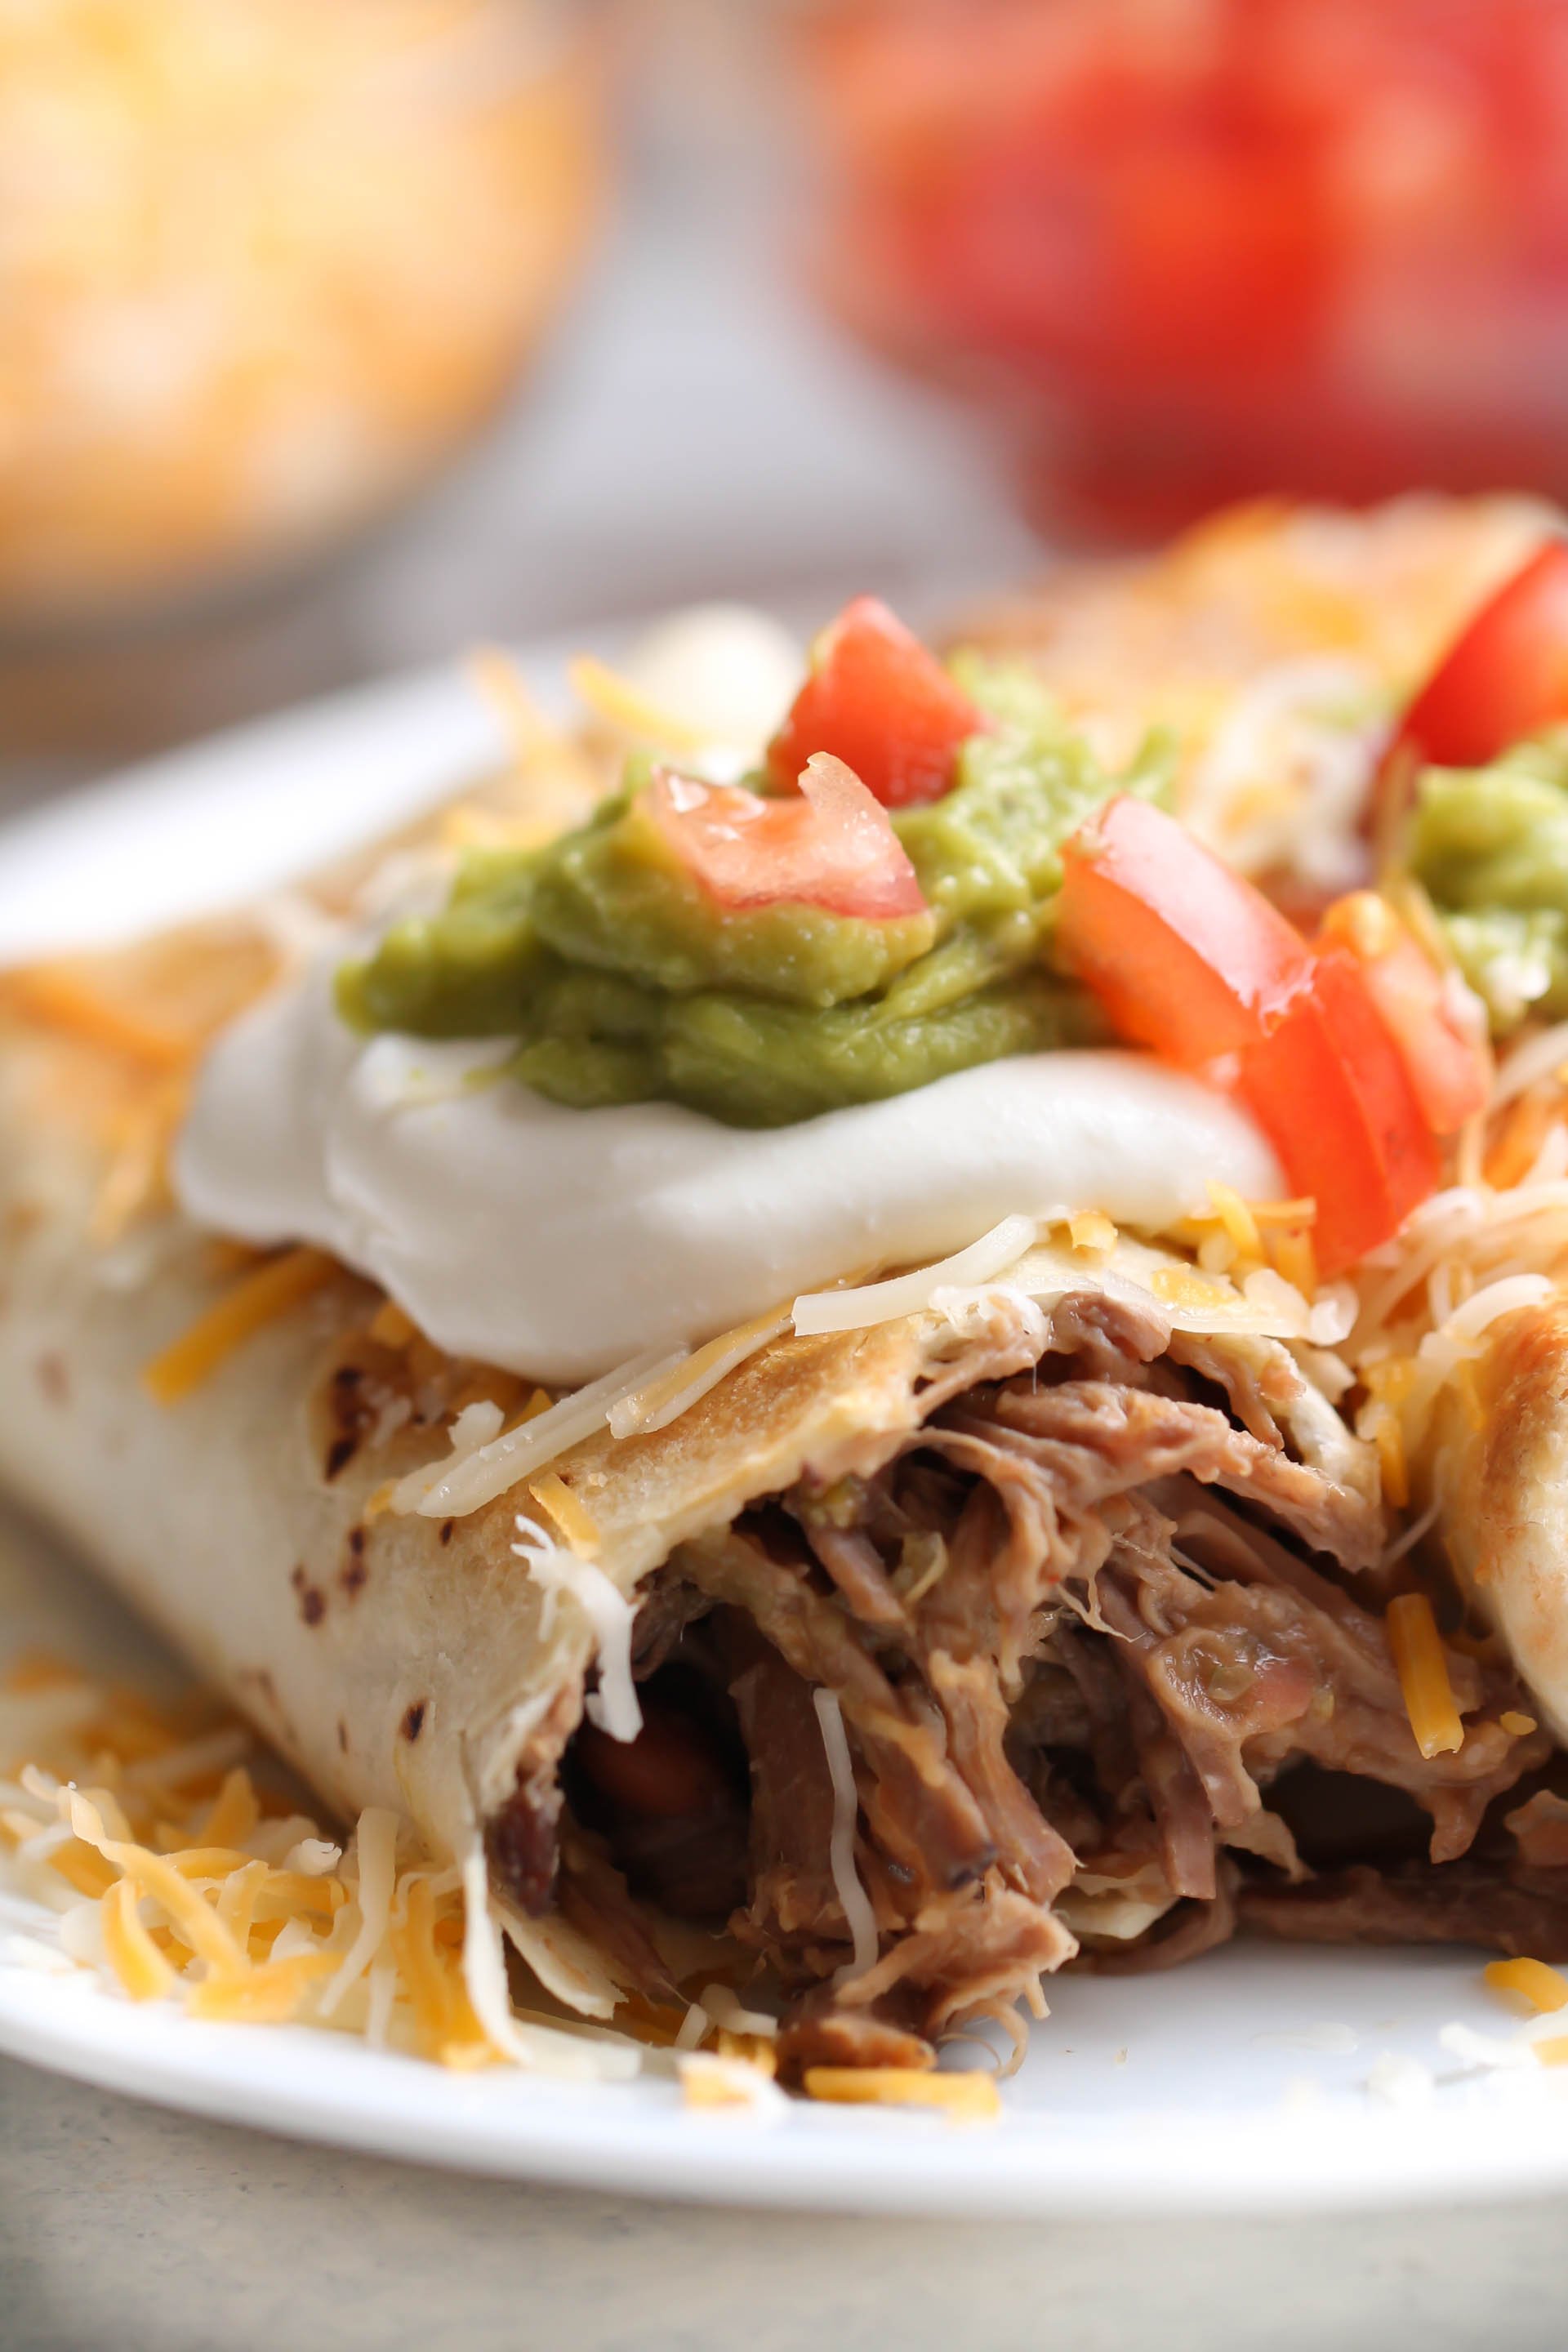 Baked Shredded Beef Chimichangas Recipe